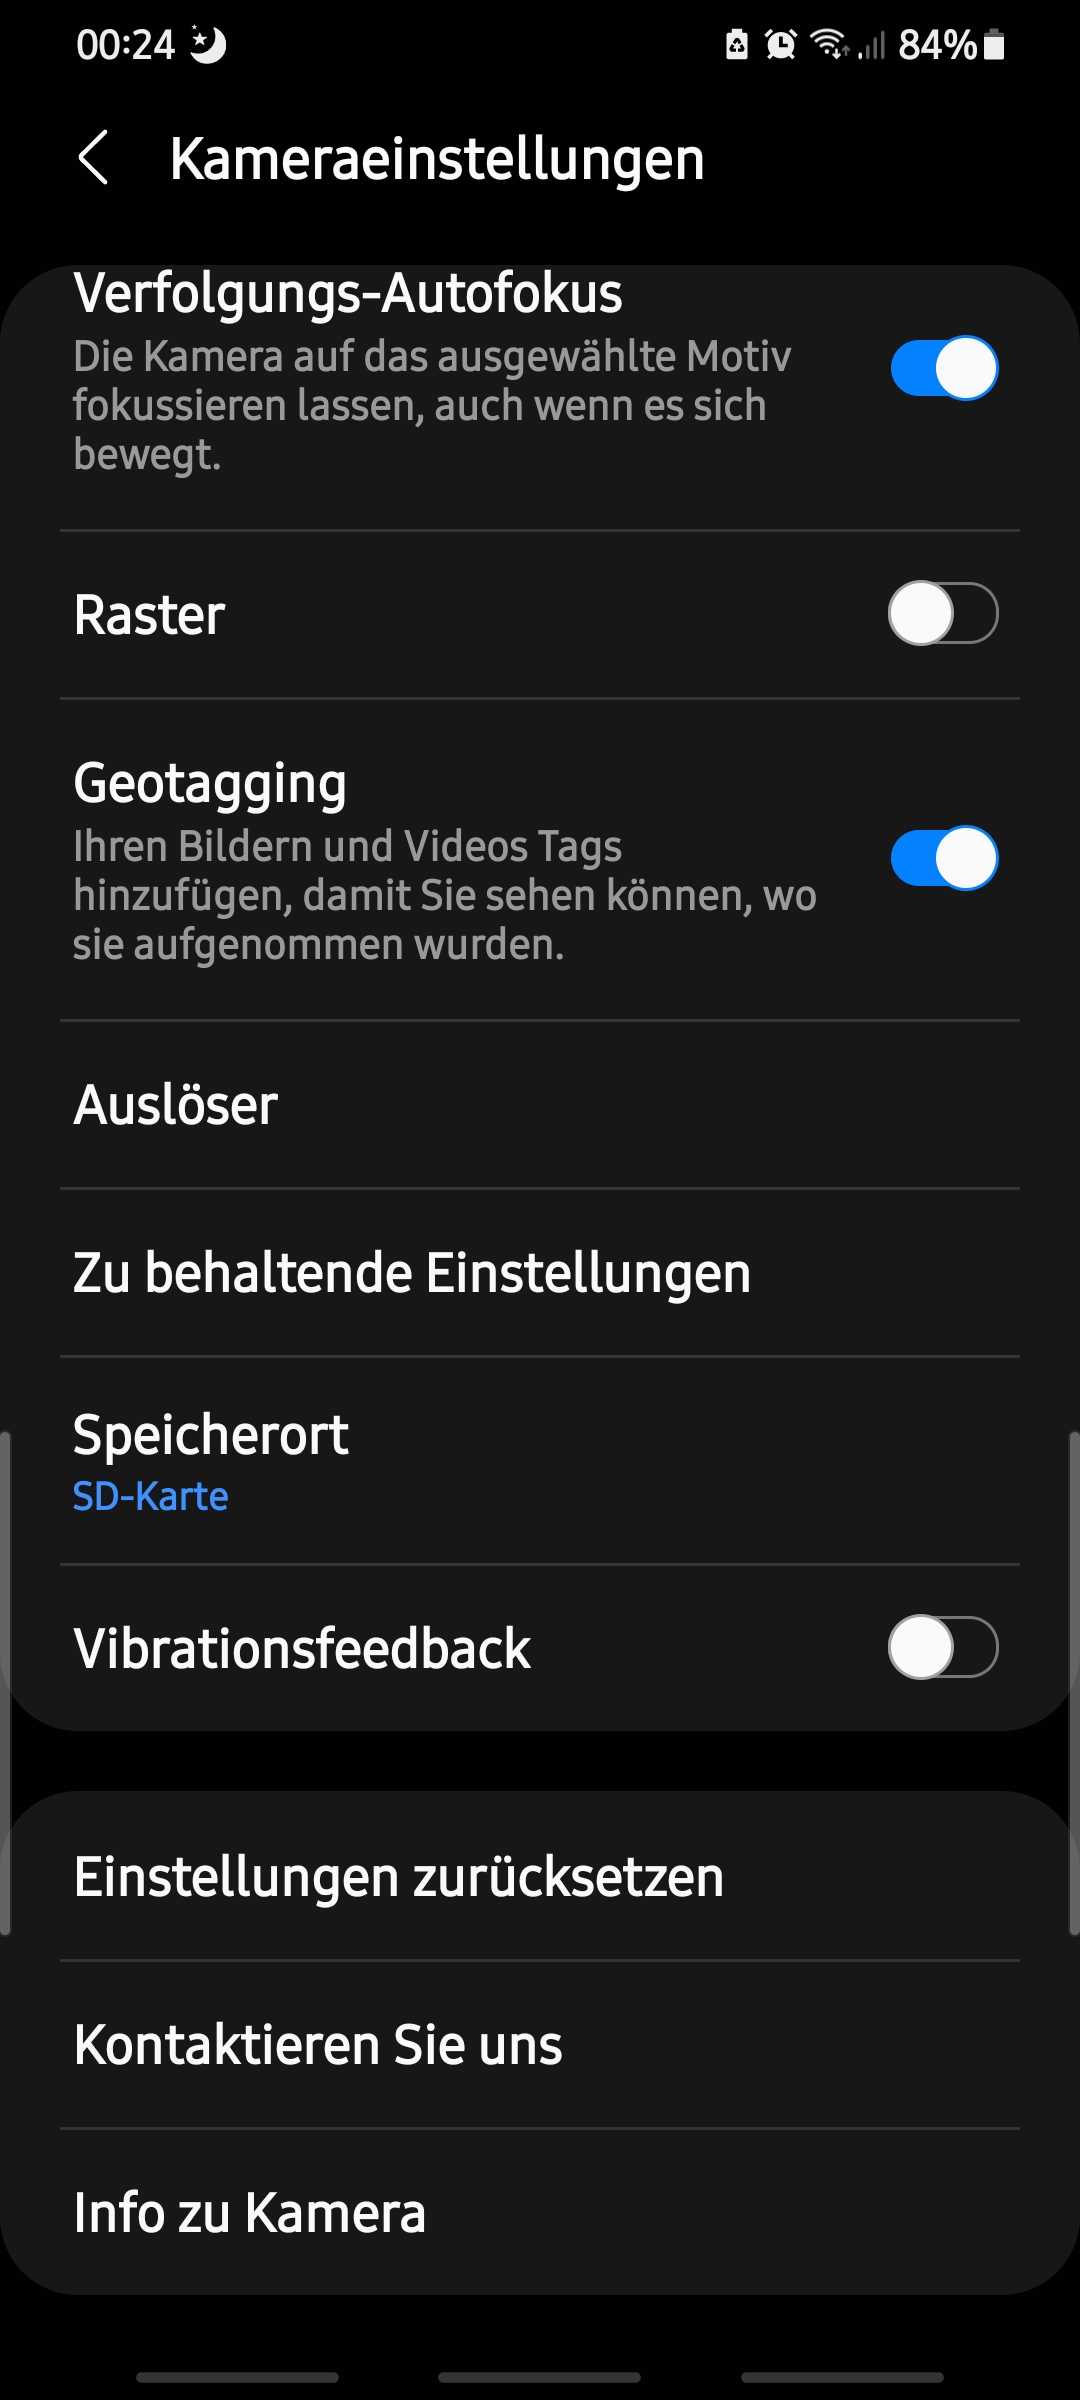 Zugriff auf SD-Card/Android/data unter Android 11 - Samsung Community